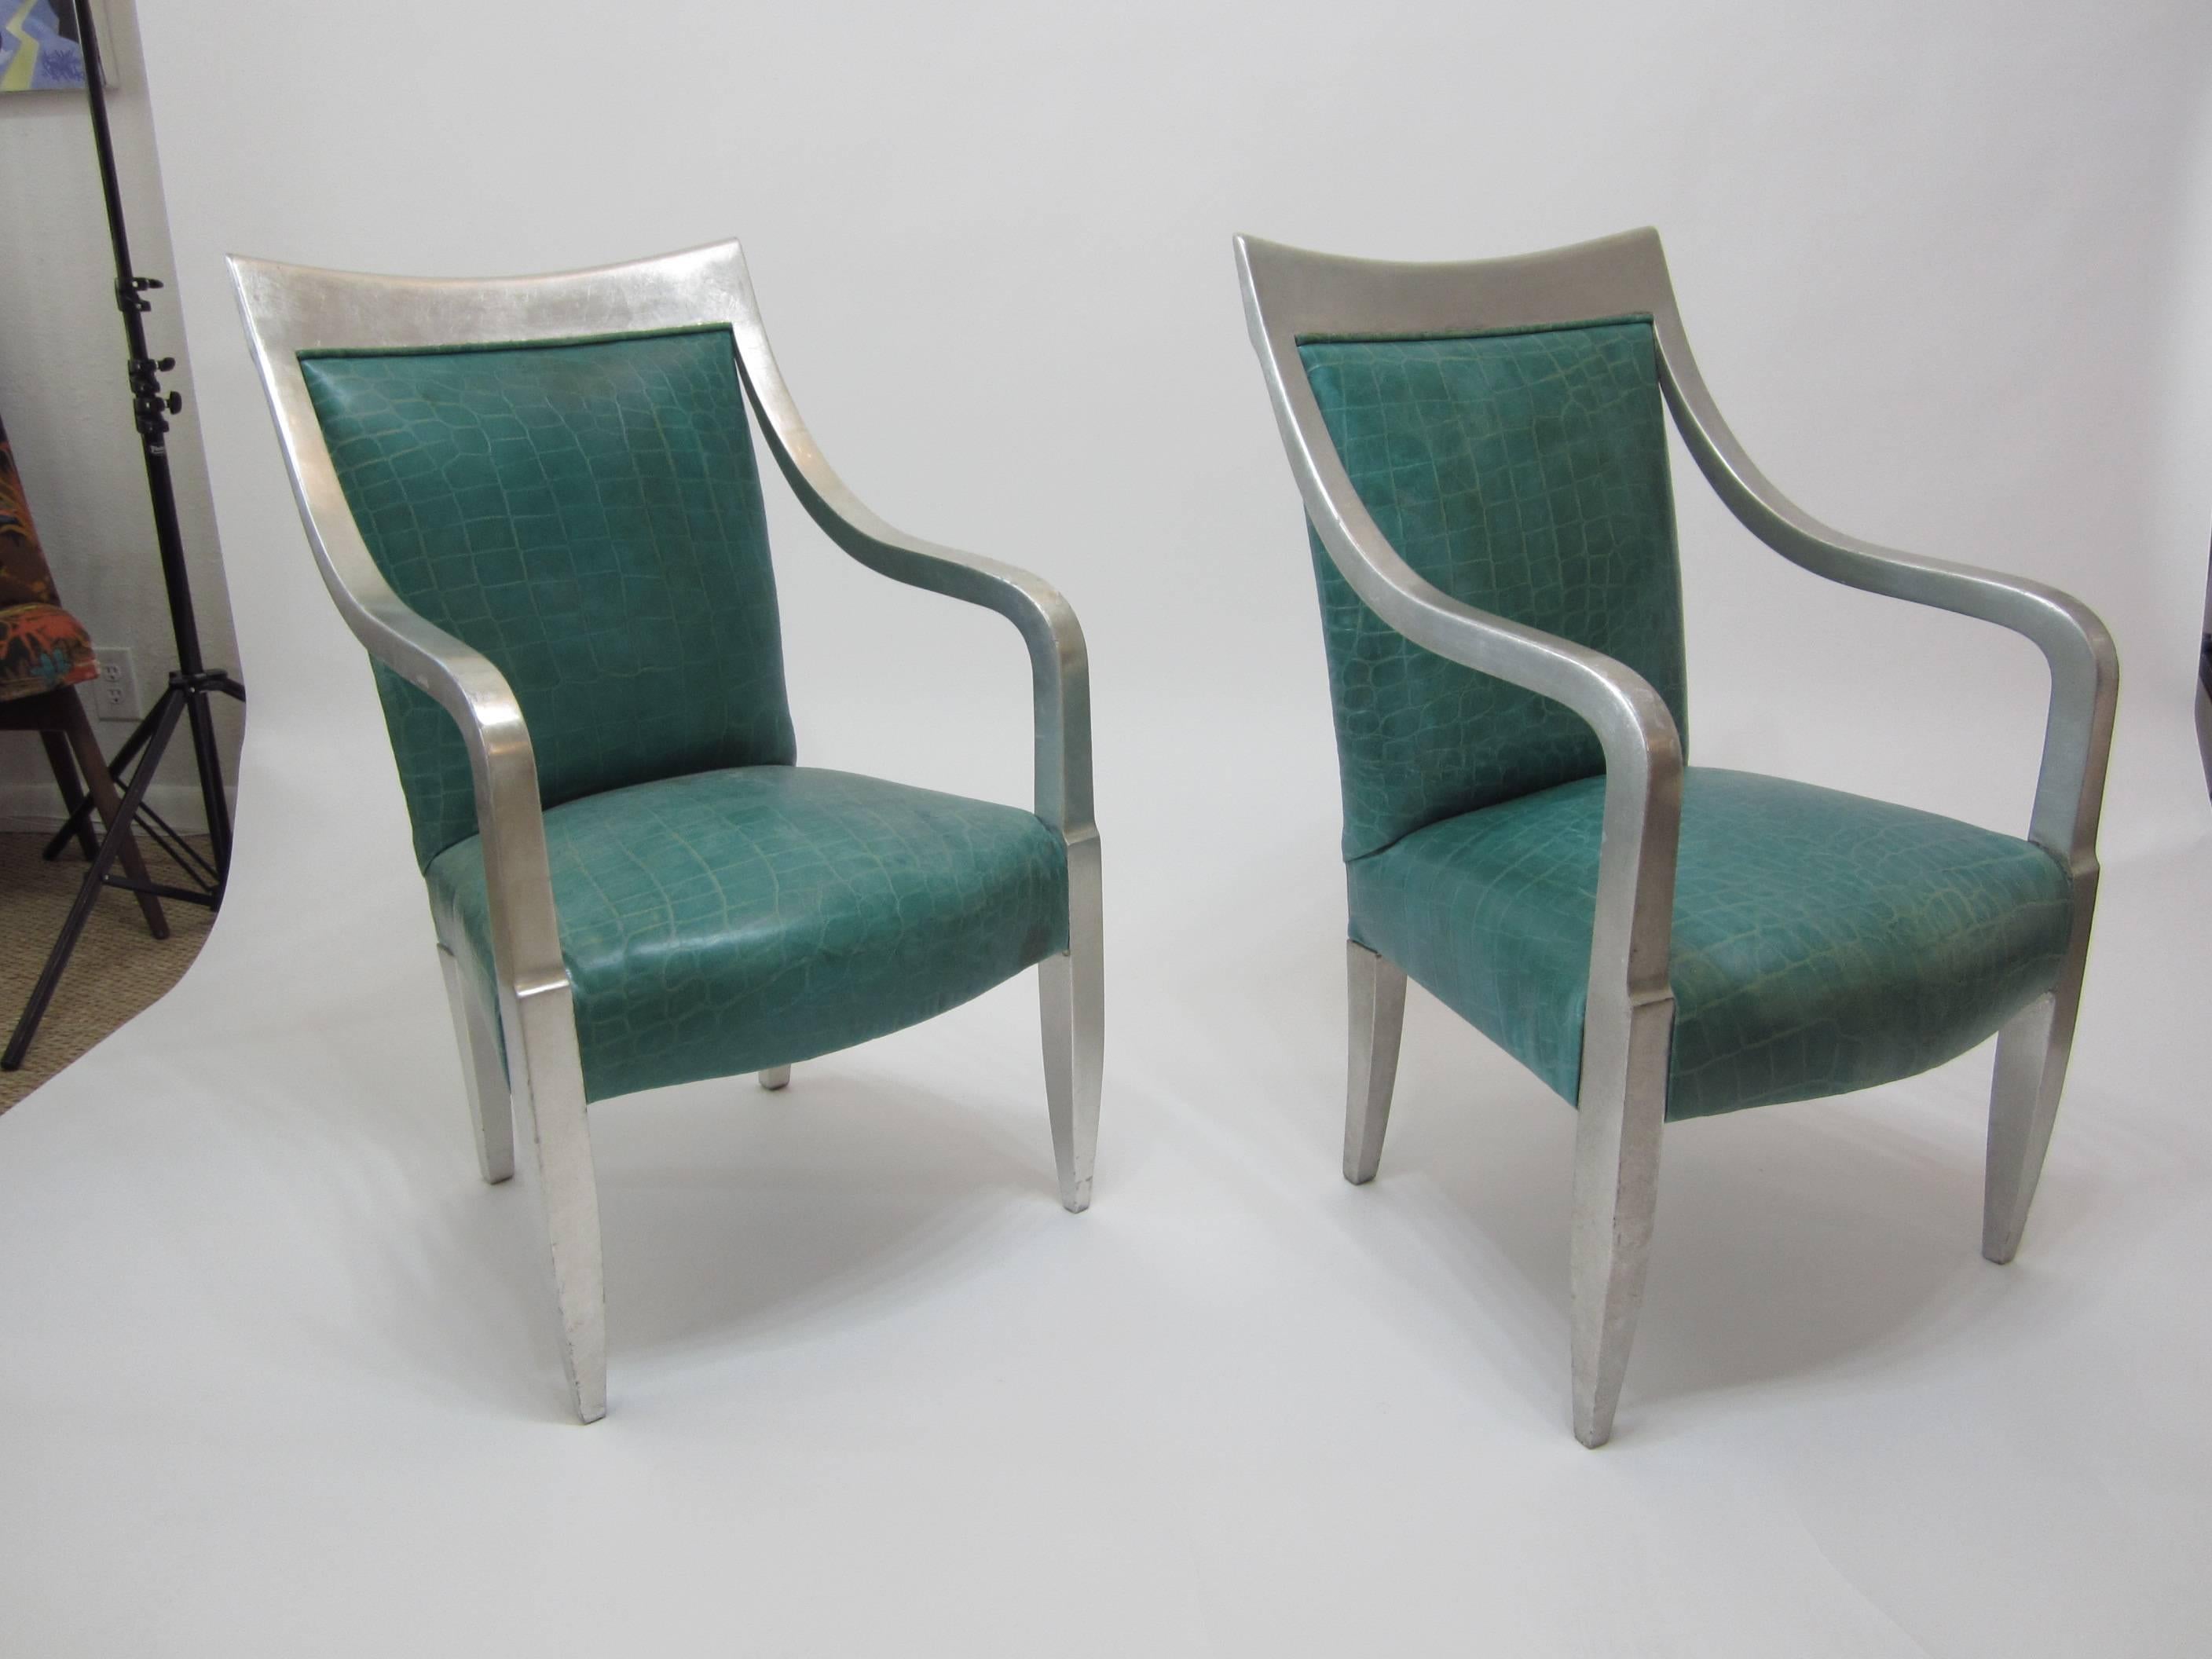 Beautiful pair of silver leaf wood frame armchairs in aqua crocodile embossed leather. With swooping open arm frames and turquoise leather, these chairs have large character and make a great statement! Sold as a pair in original great condition with